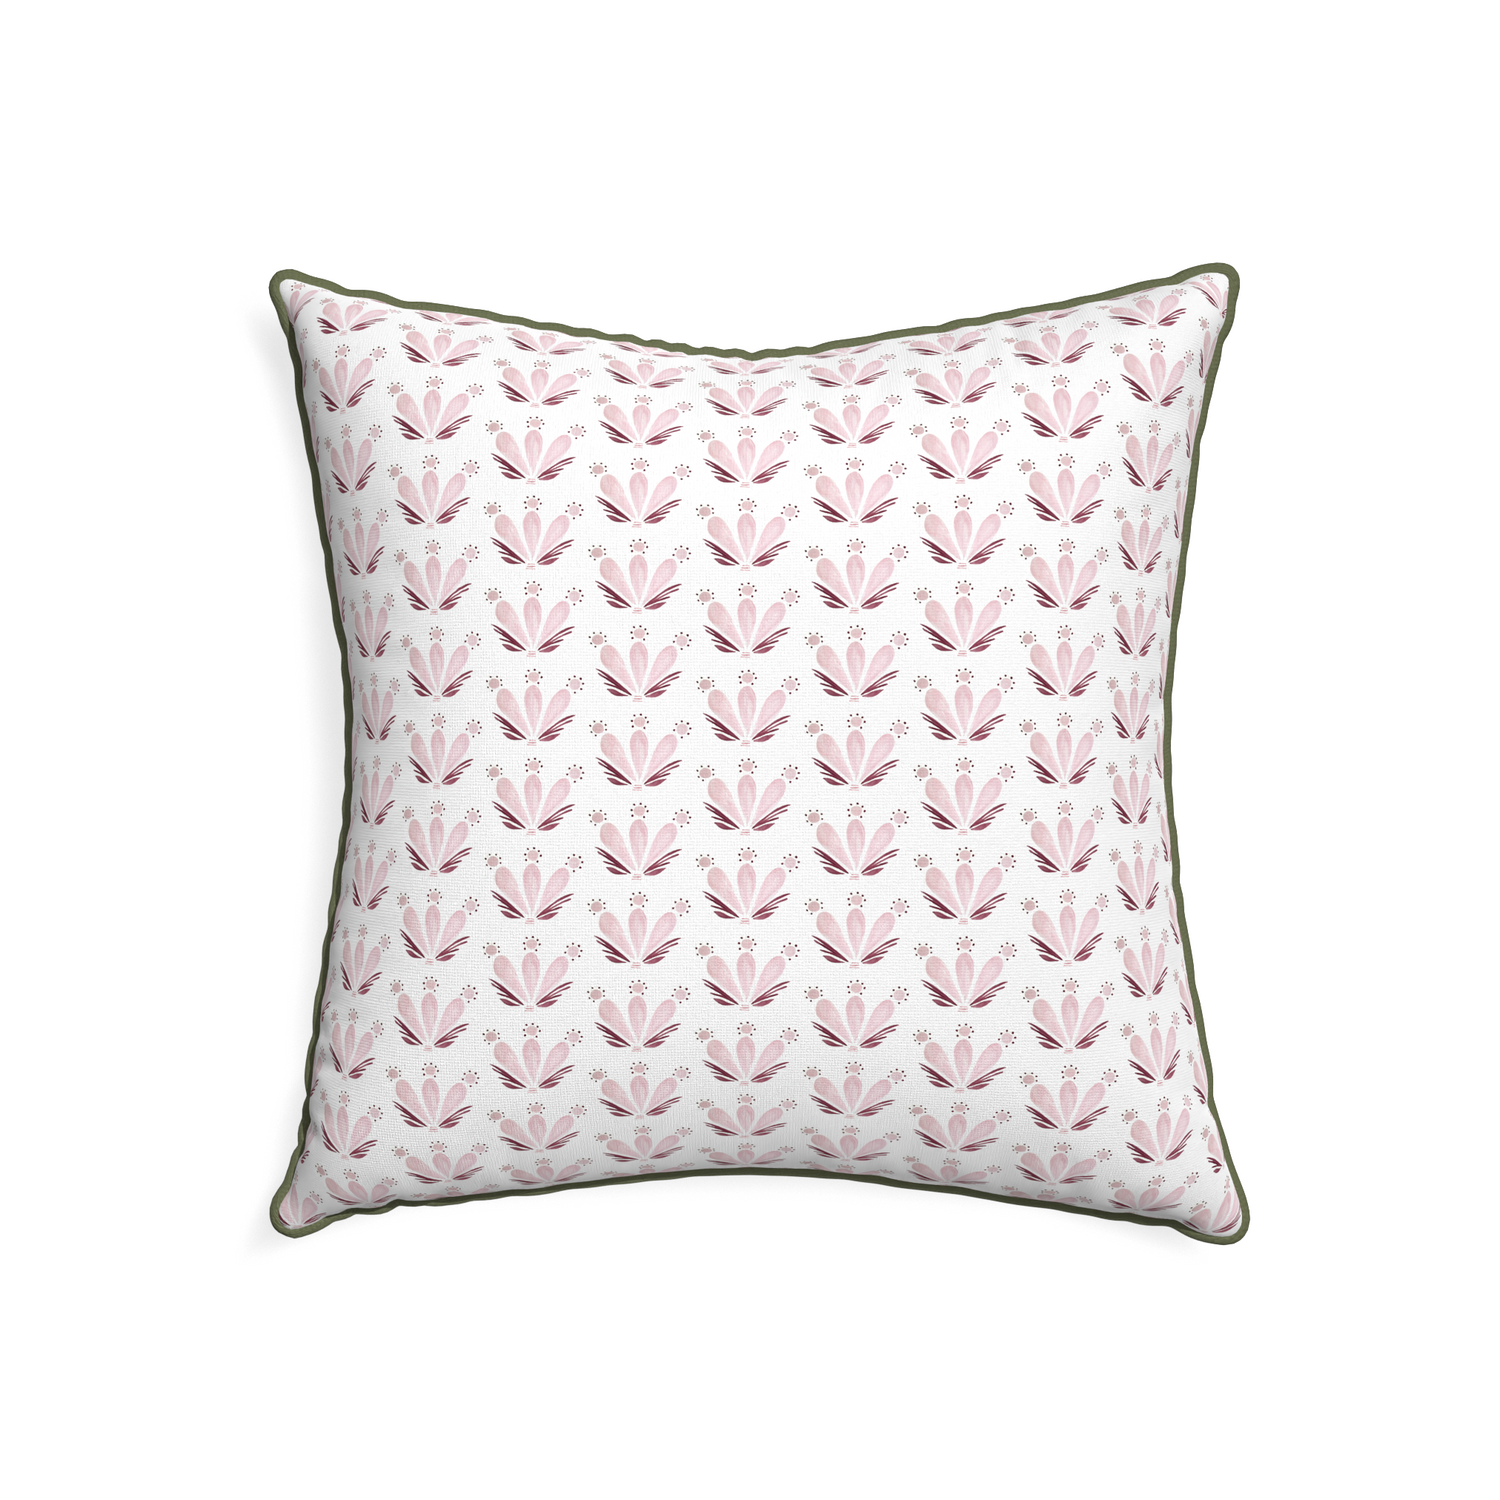 22-square serena pink custom pink & burgundy drop repeat floralpillow with f piping on white background